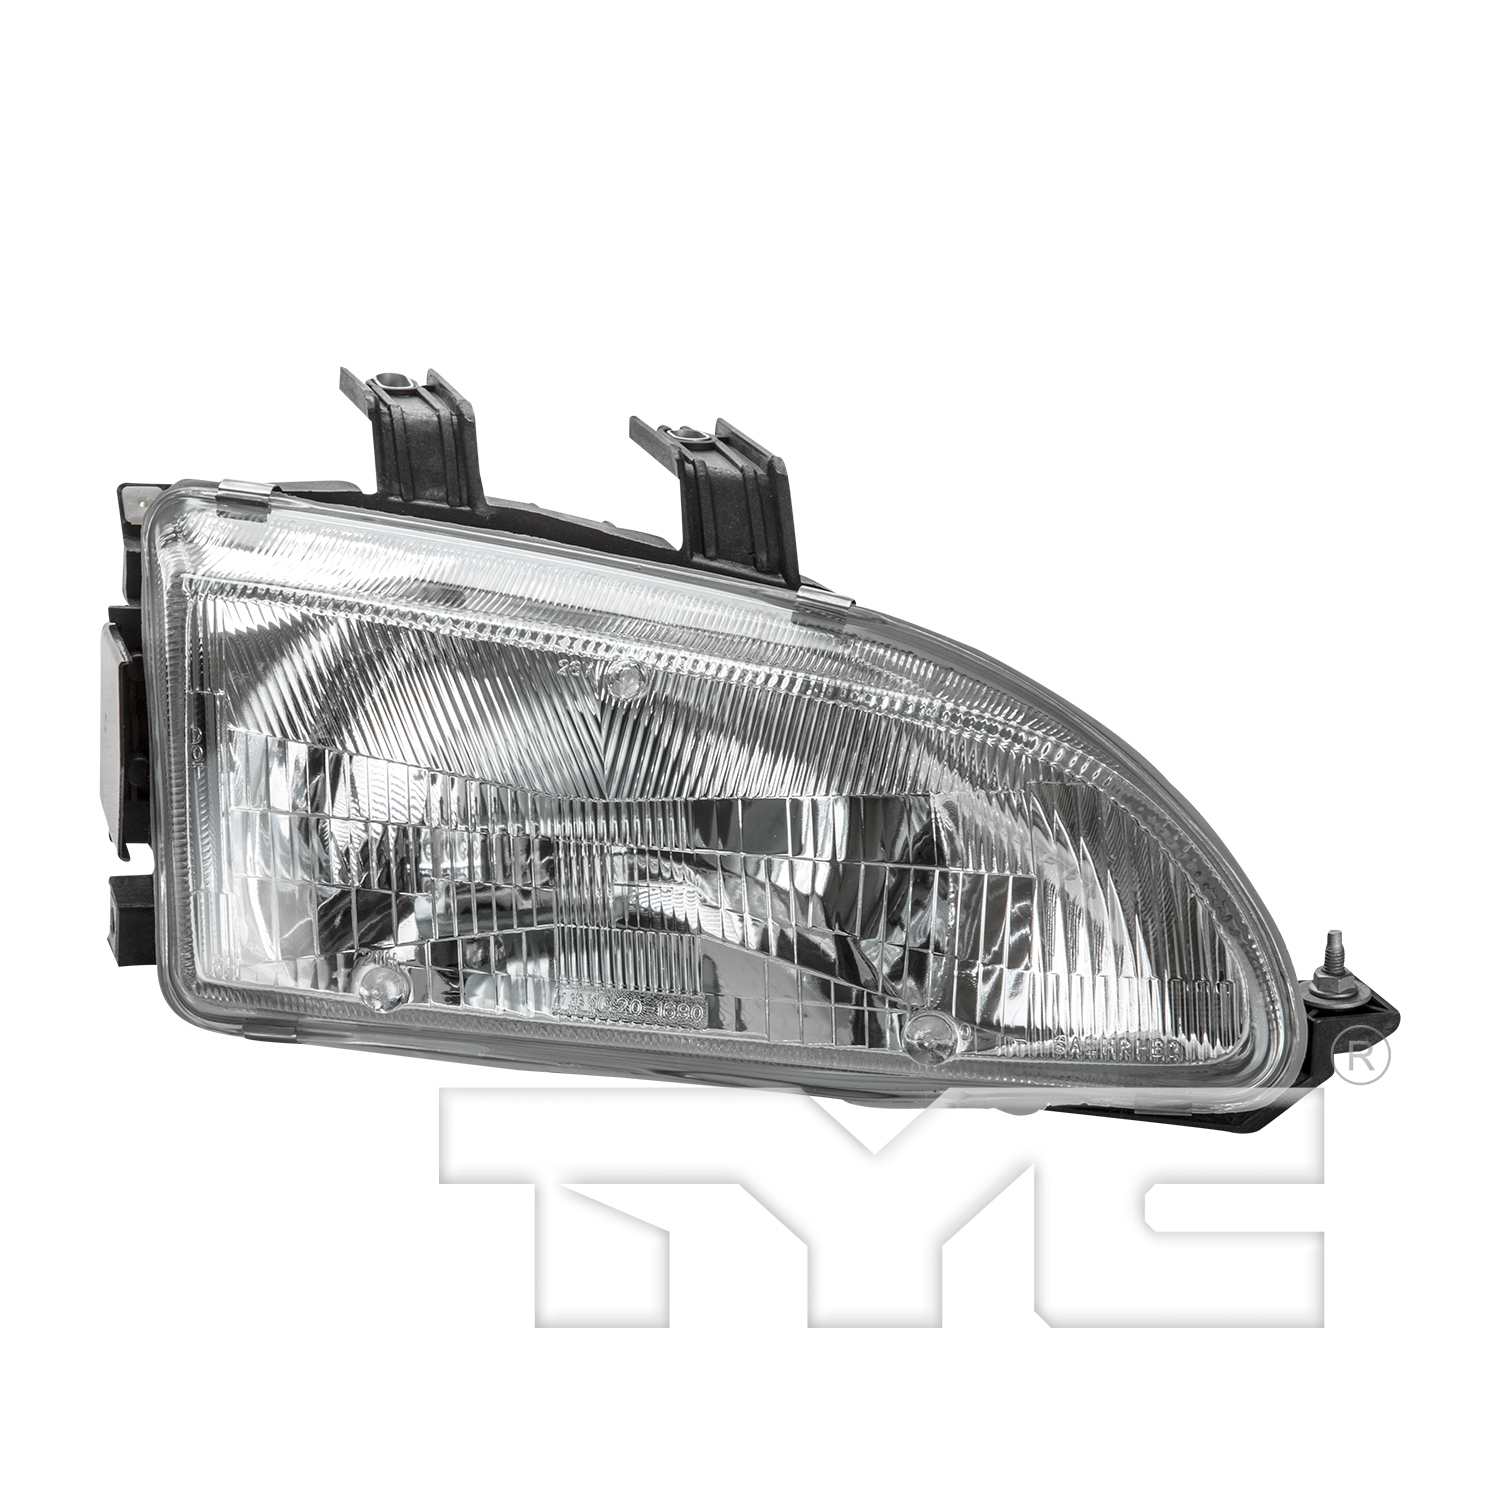 Aftermarket HEADLIGHTS for HONDA - CIVIC, CIVIC,92-95,RT Headlamp assy composite